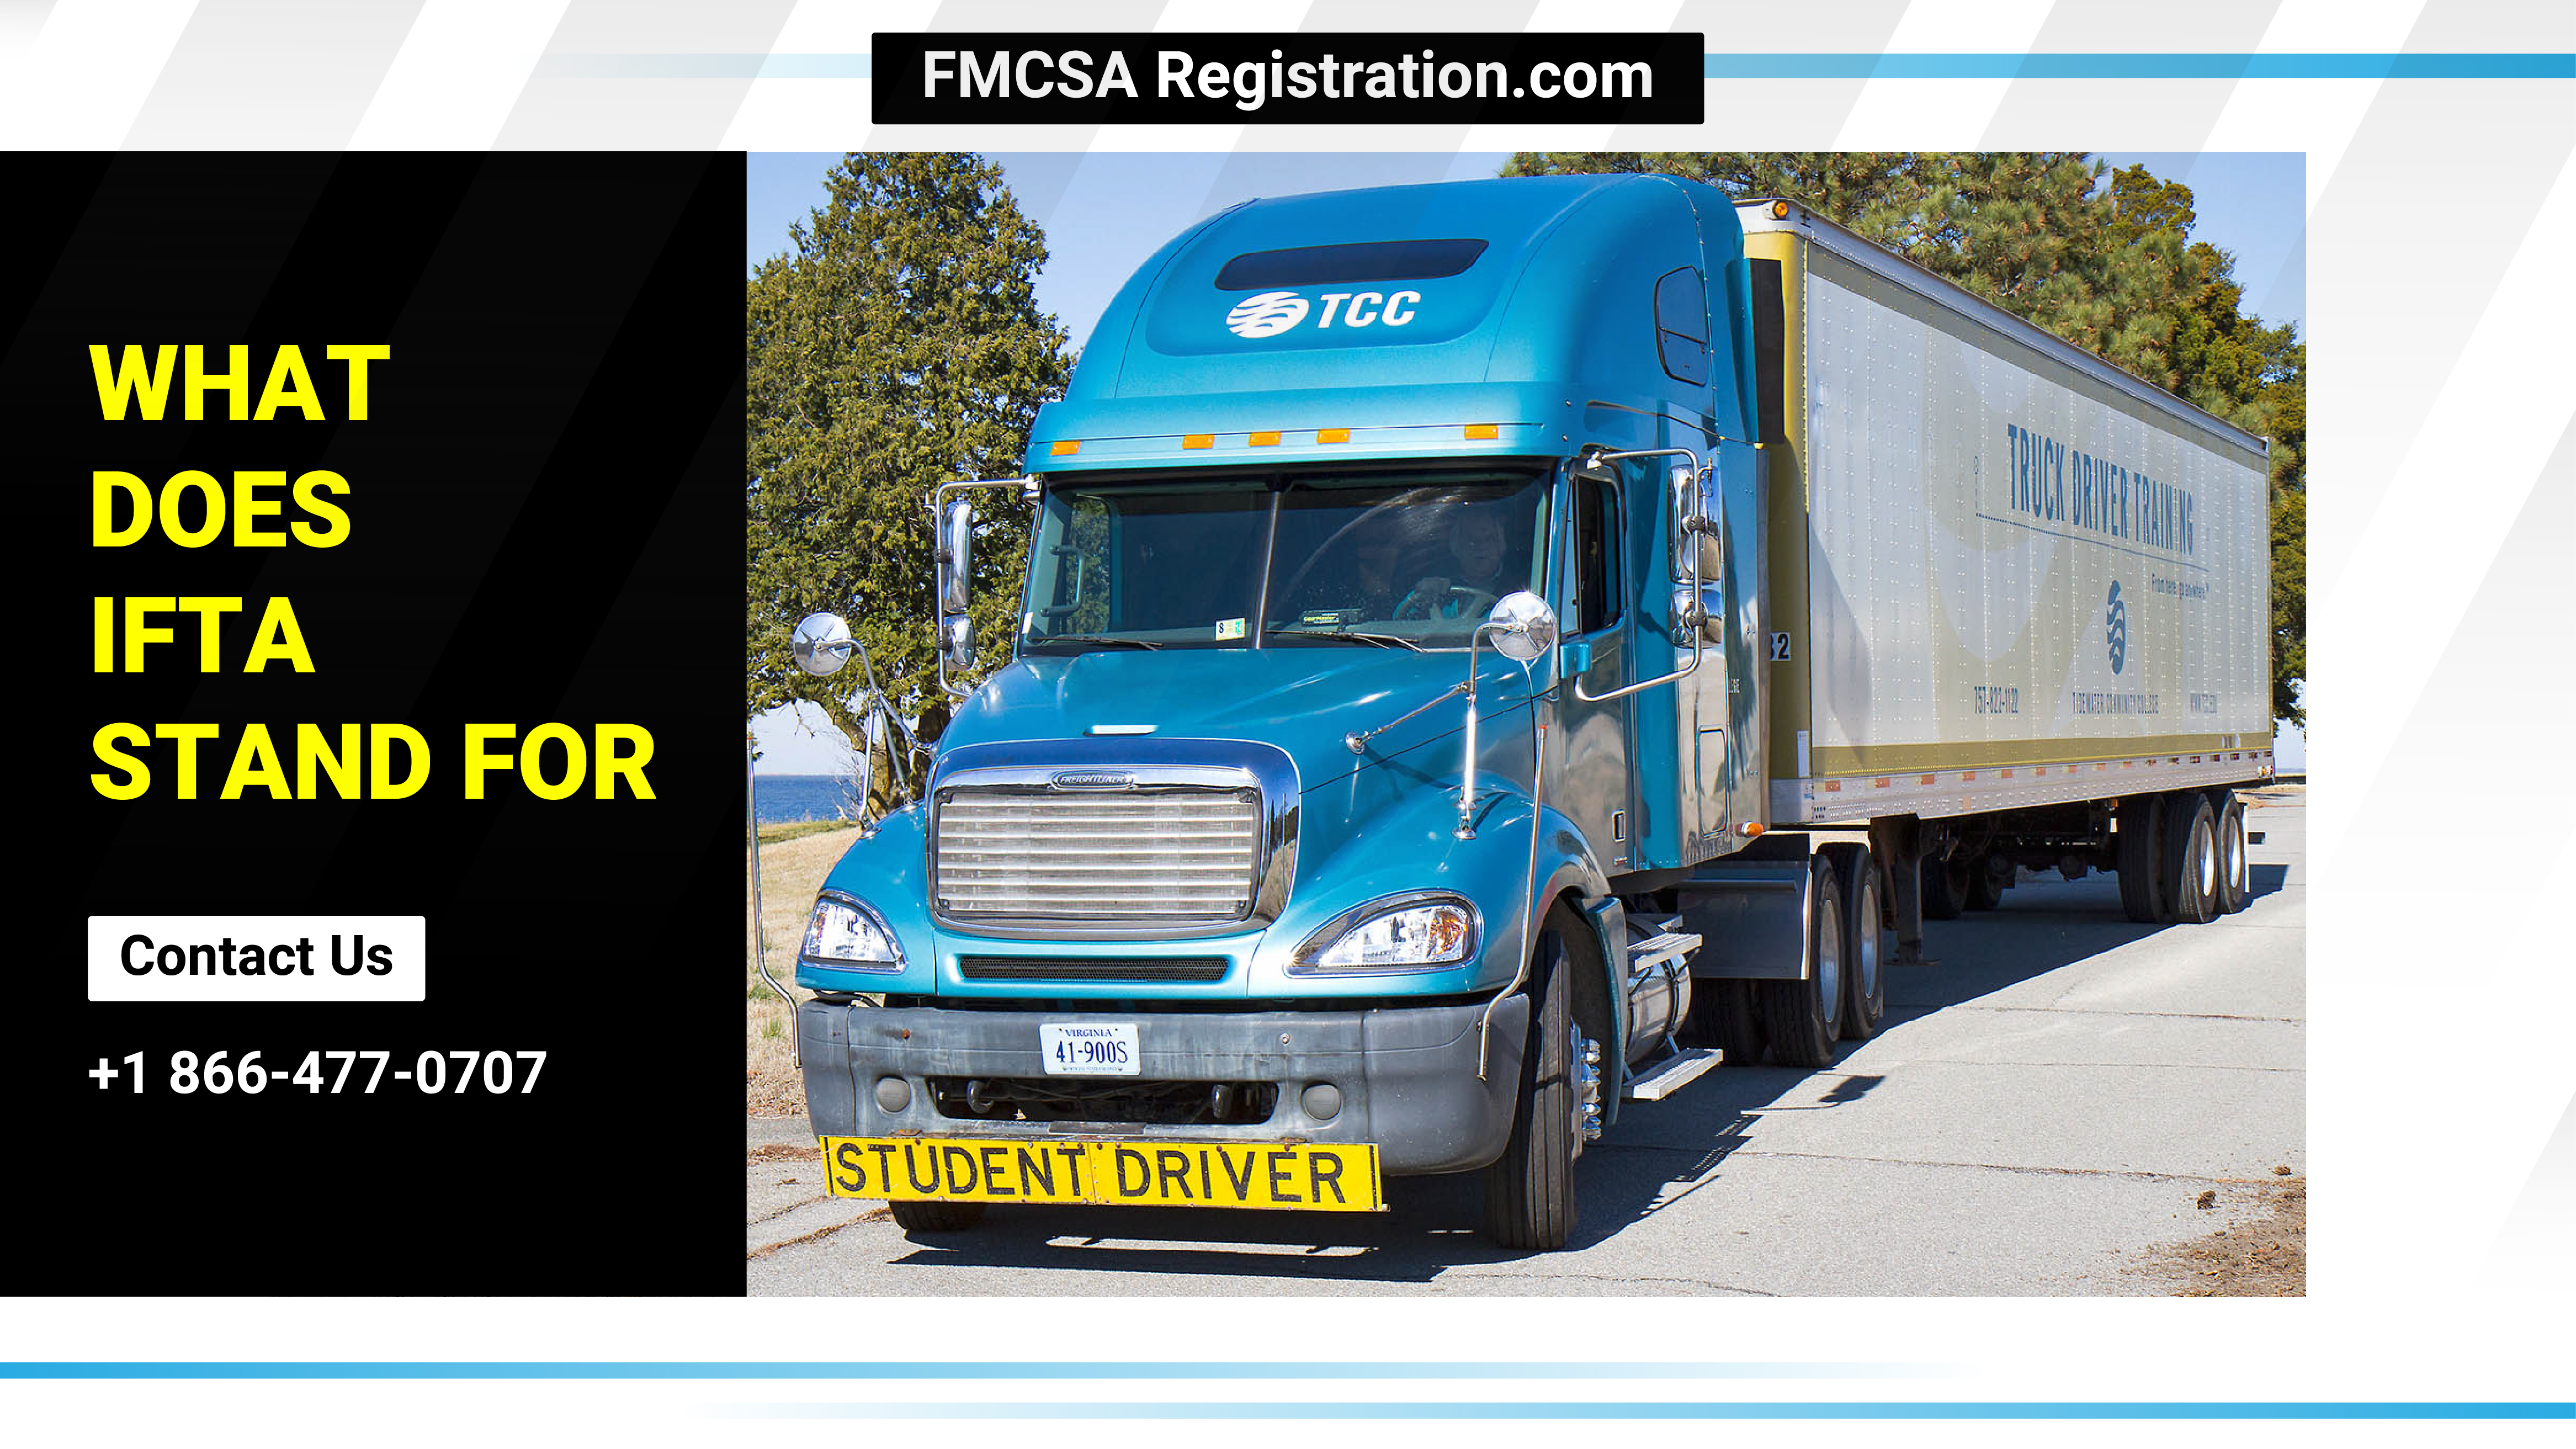 What does IFTA stand for interstate carrier with mc number and dot numbers?